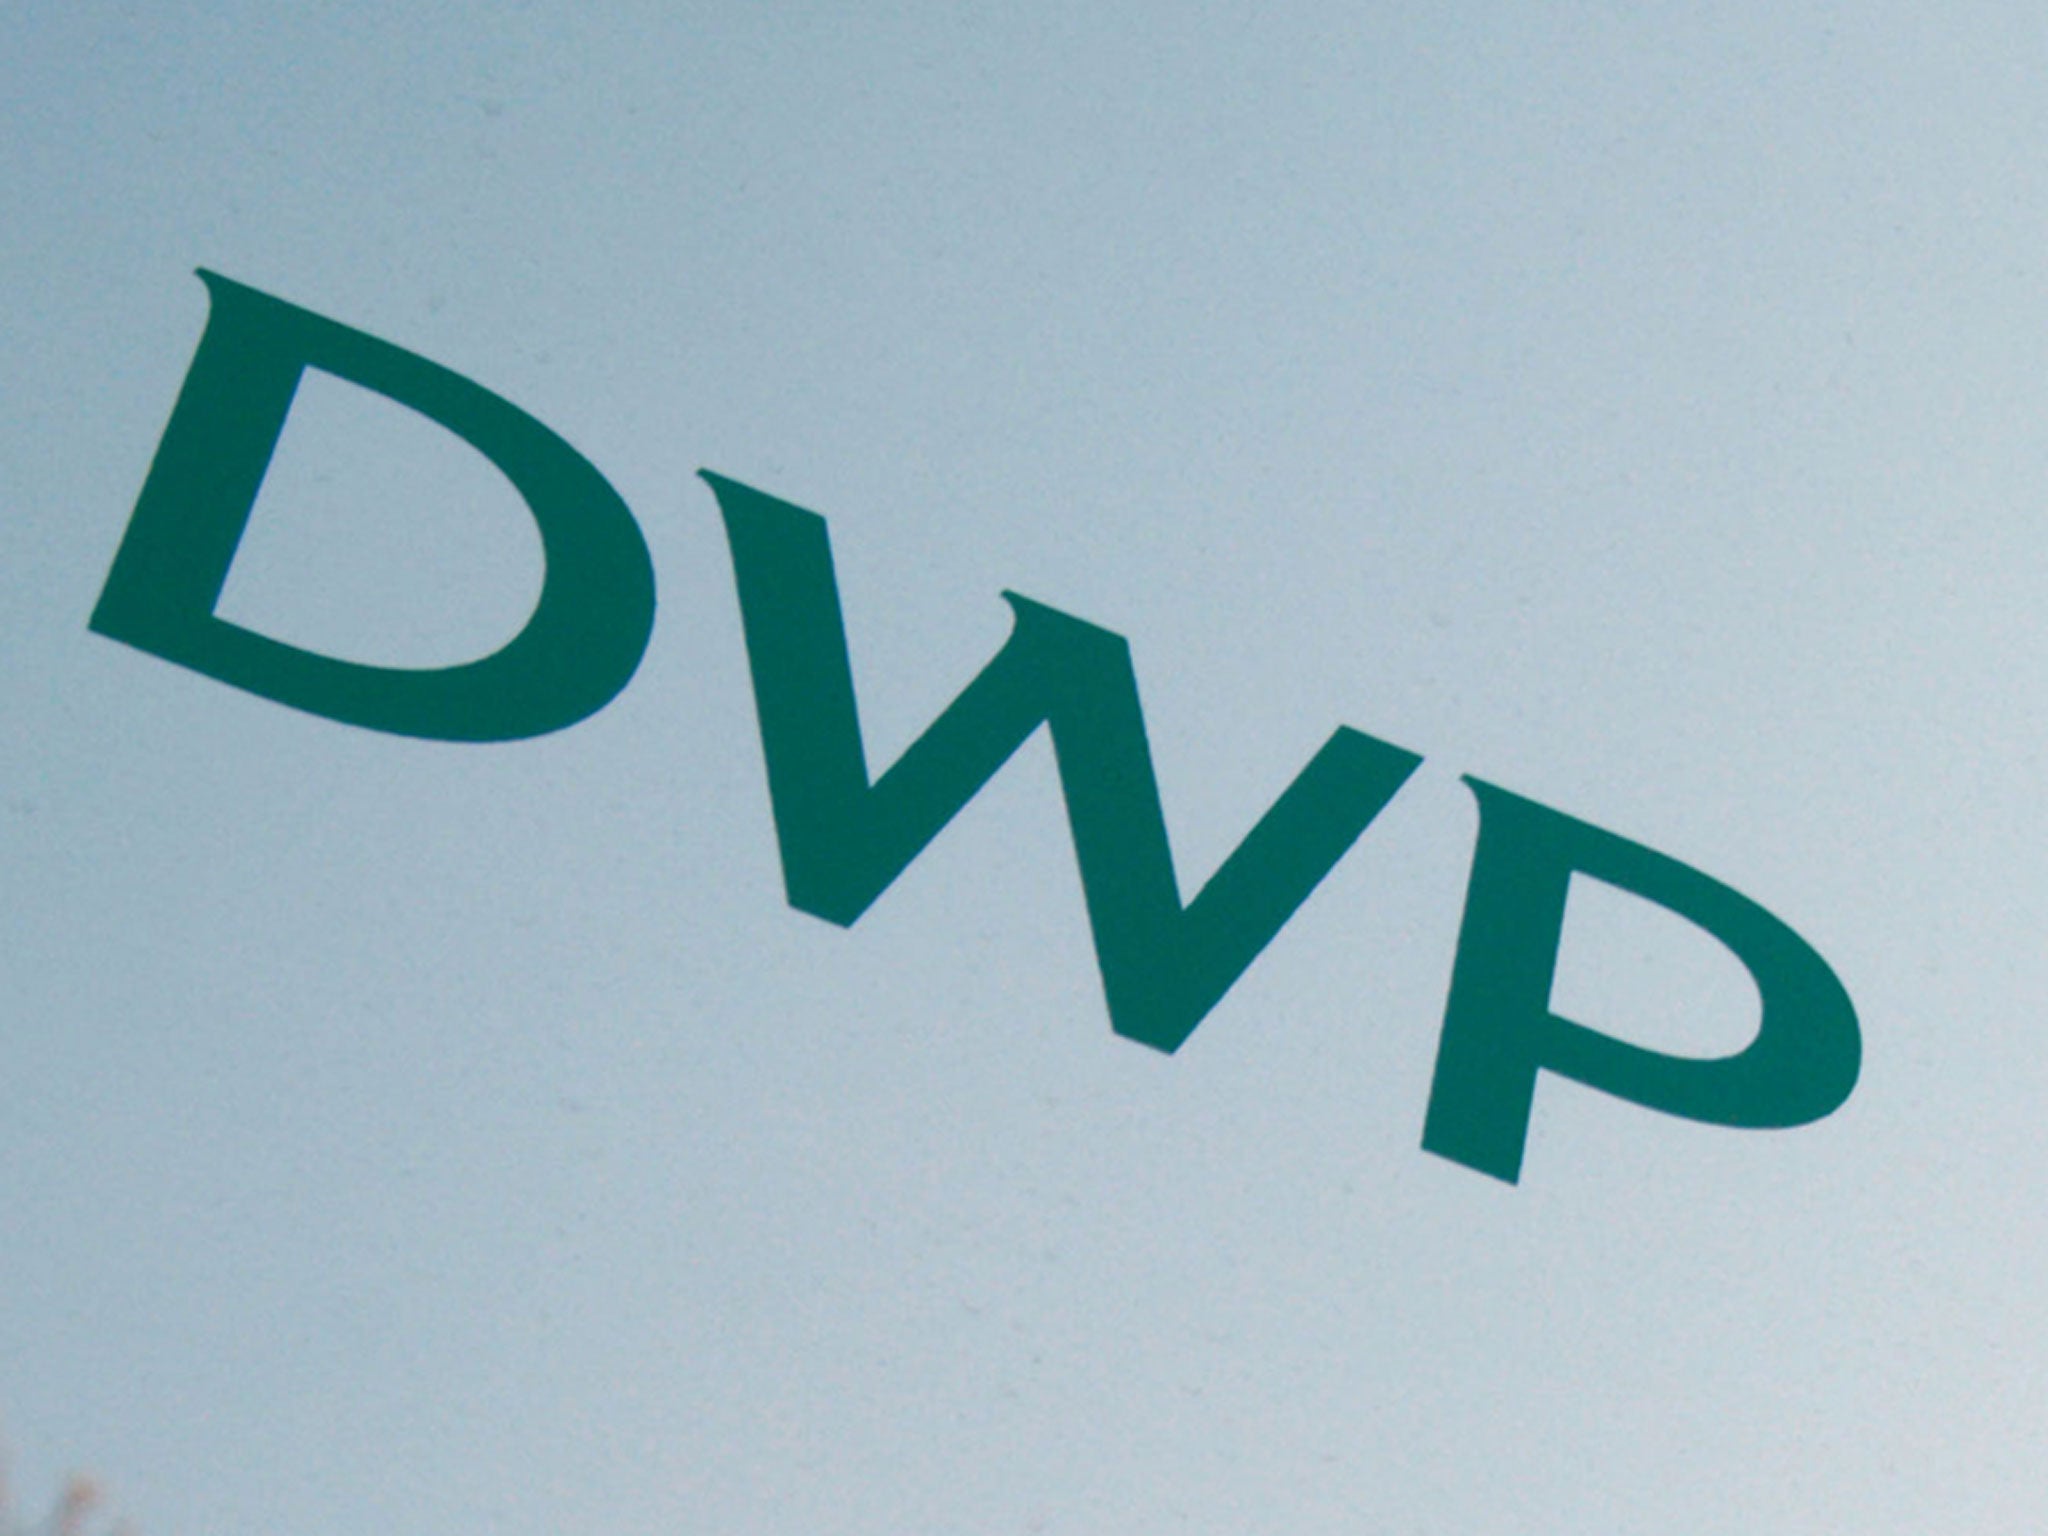 The Department of Work and Pensions (DWP)